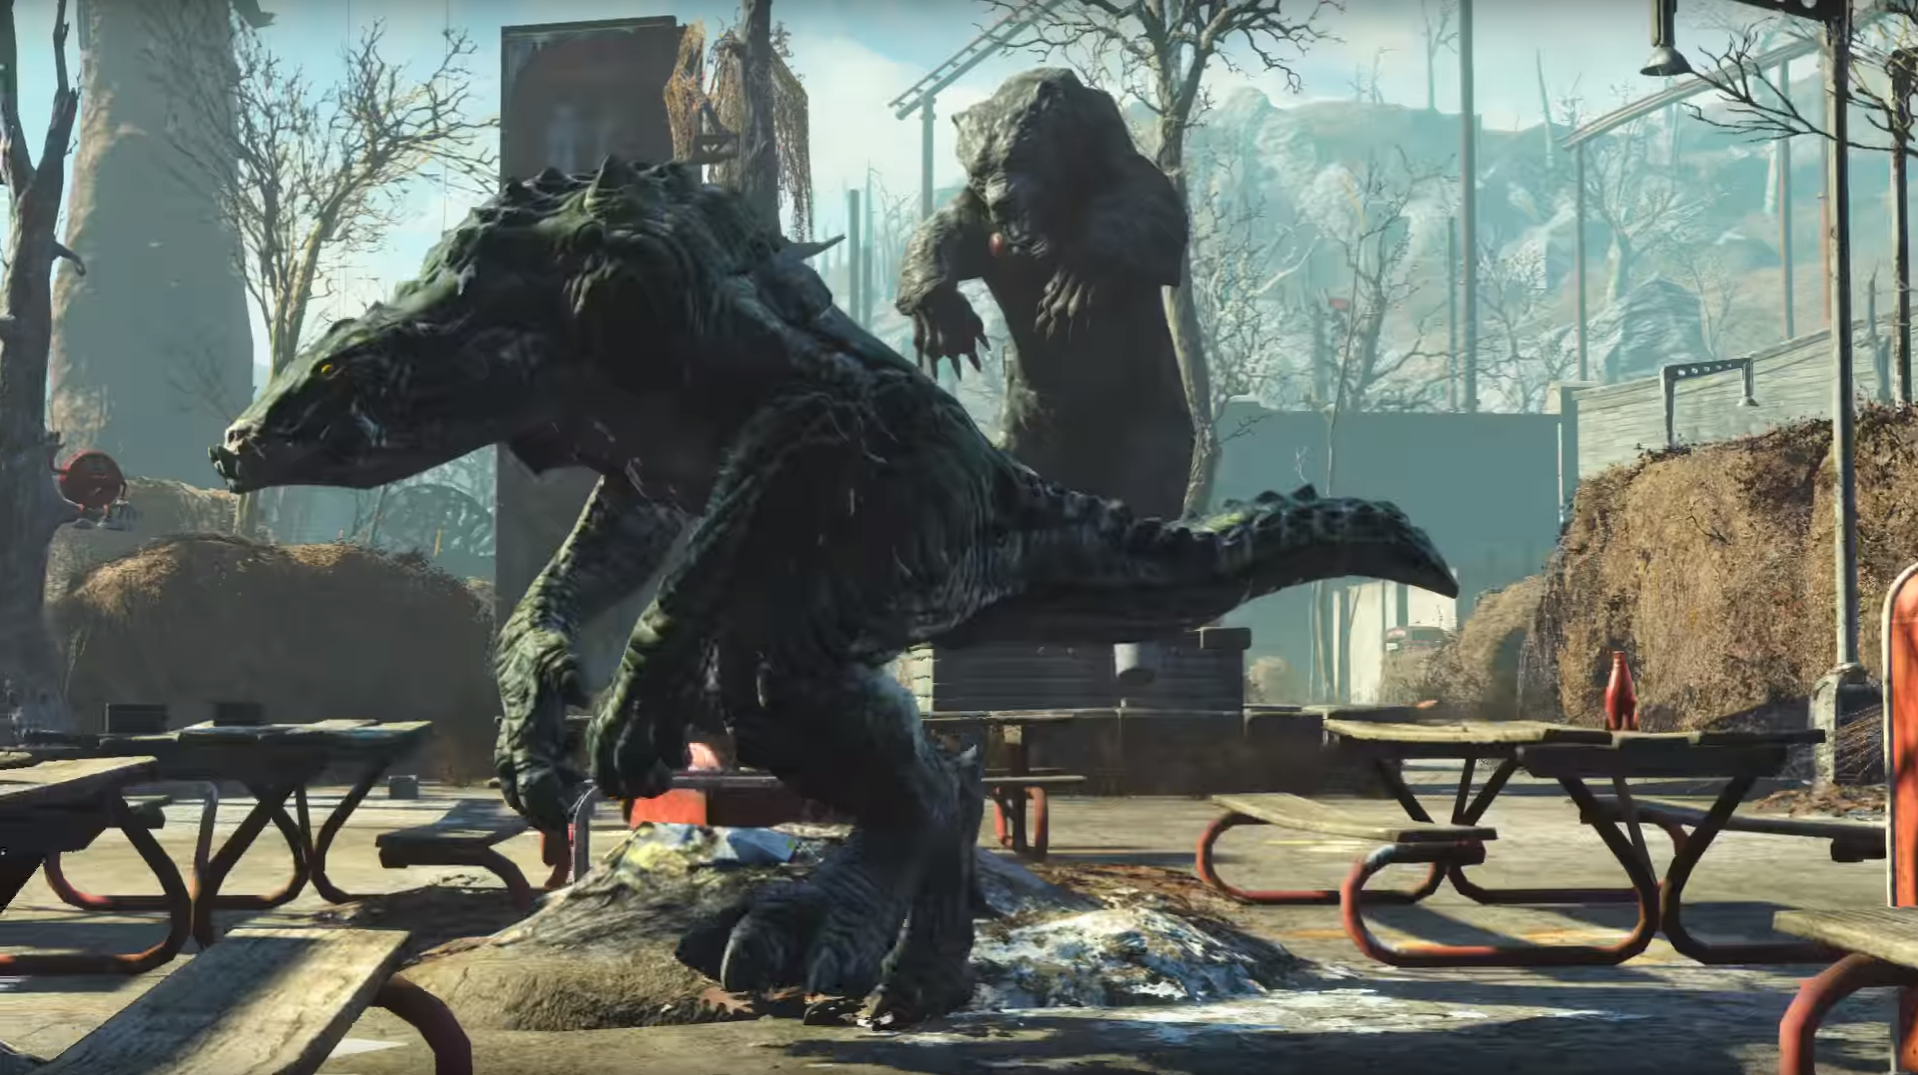 More creatures fallout 4 фото 87